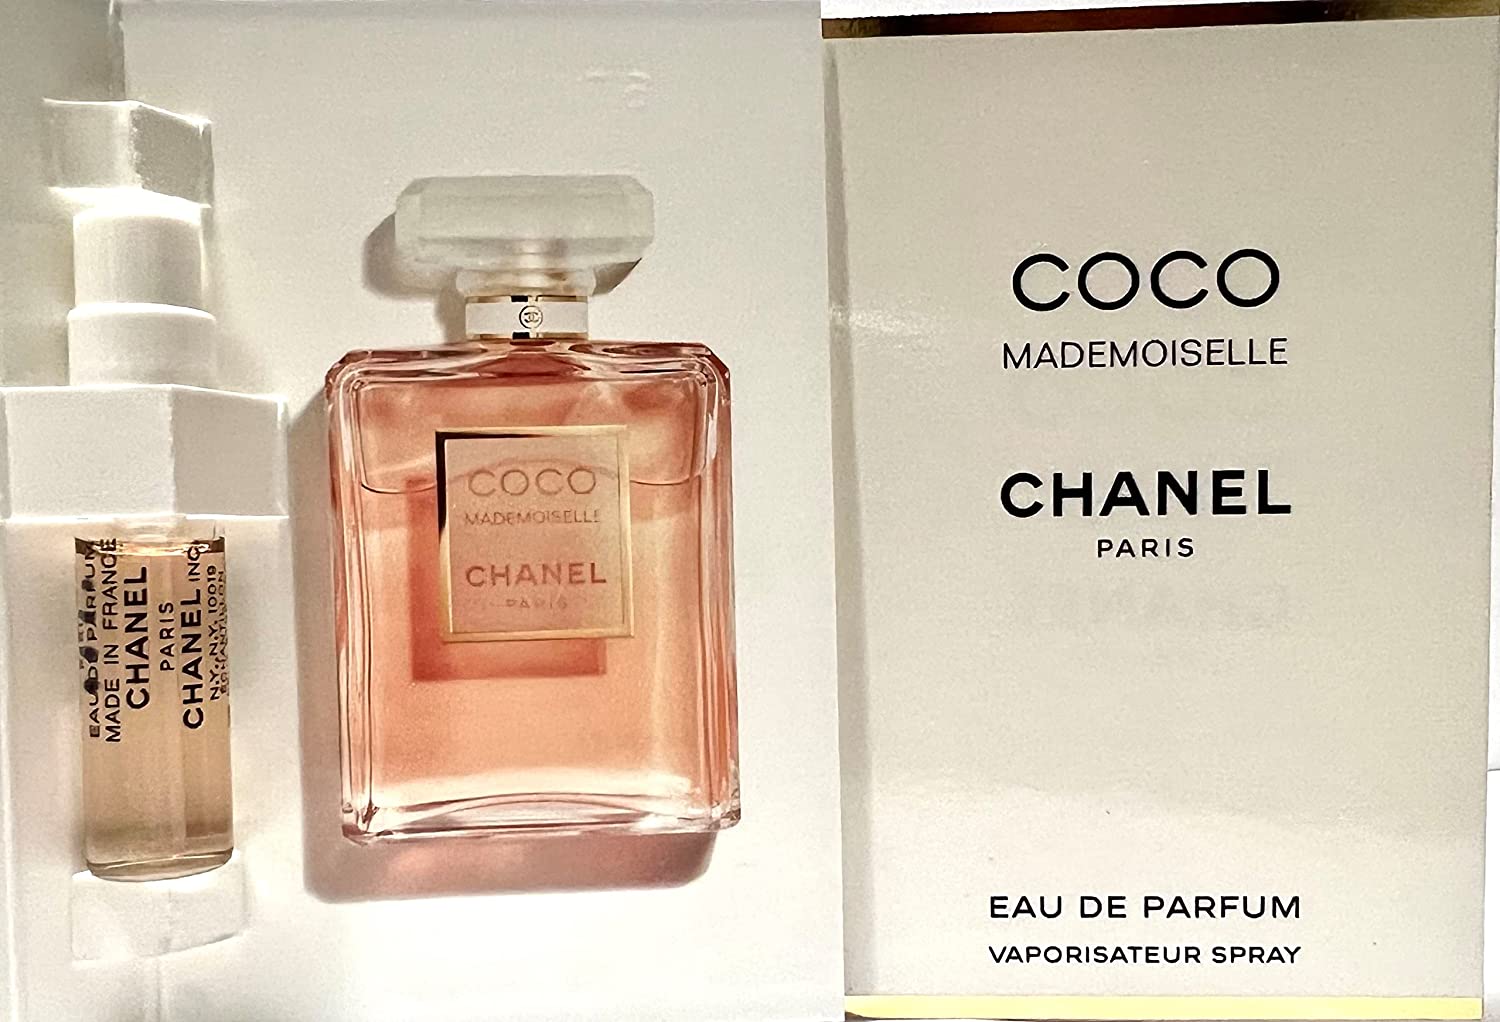 Day 3 of reviewing fragrances every day: Chanel Coco Mademoiselle